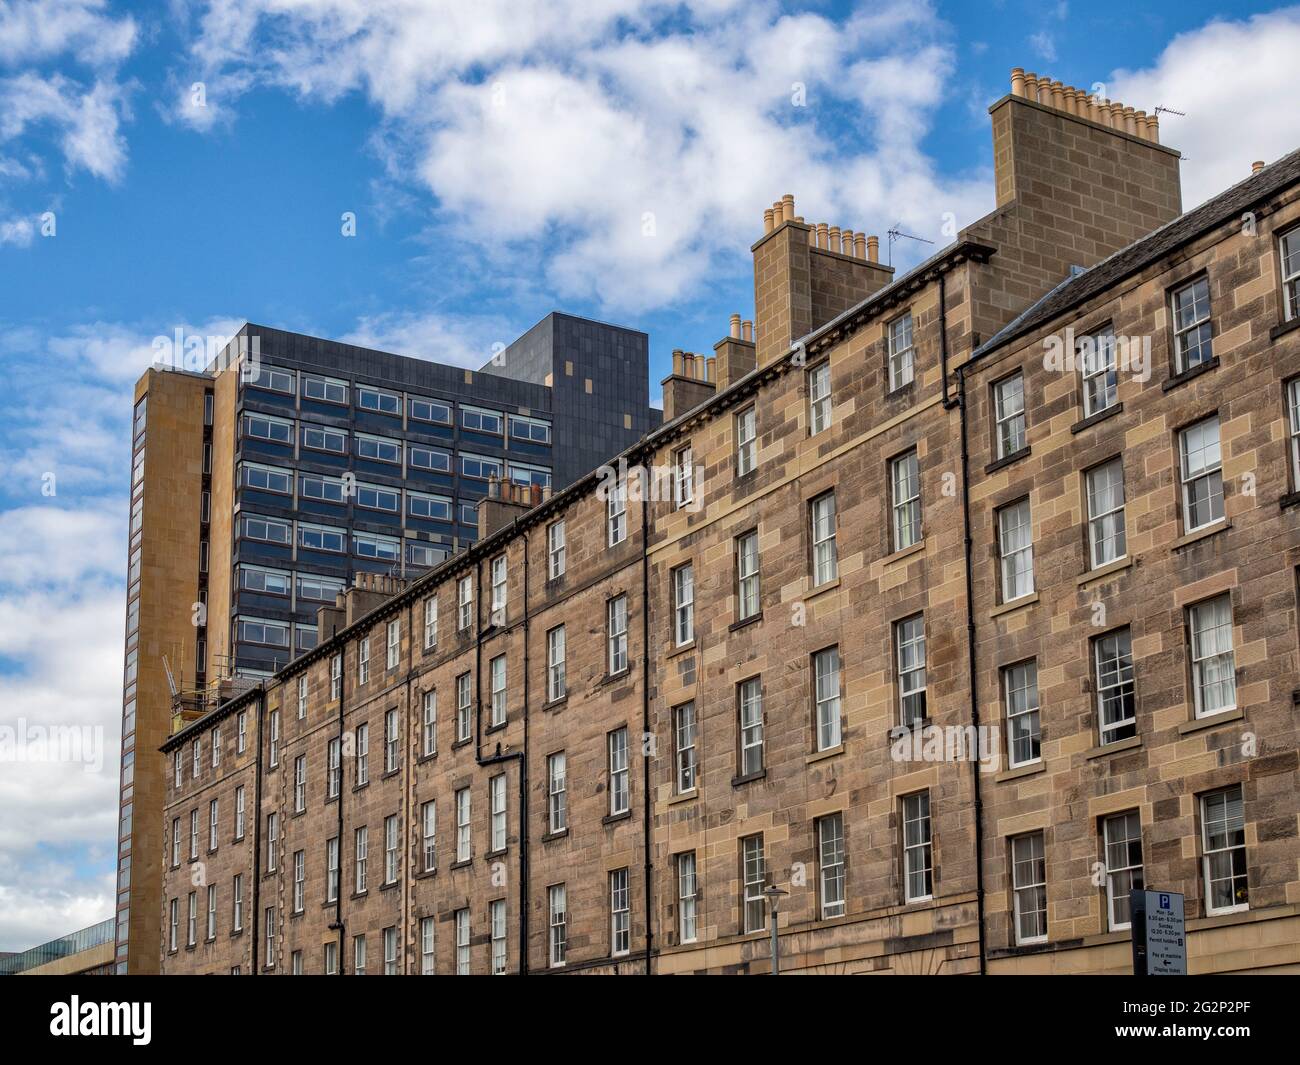 40 George Square, formerly called the David Hume Tower, from Buccleuch Place, Edinburgh, Scotland, UK Stock Photo